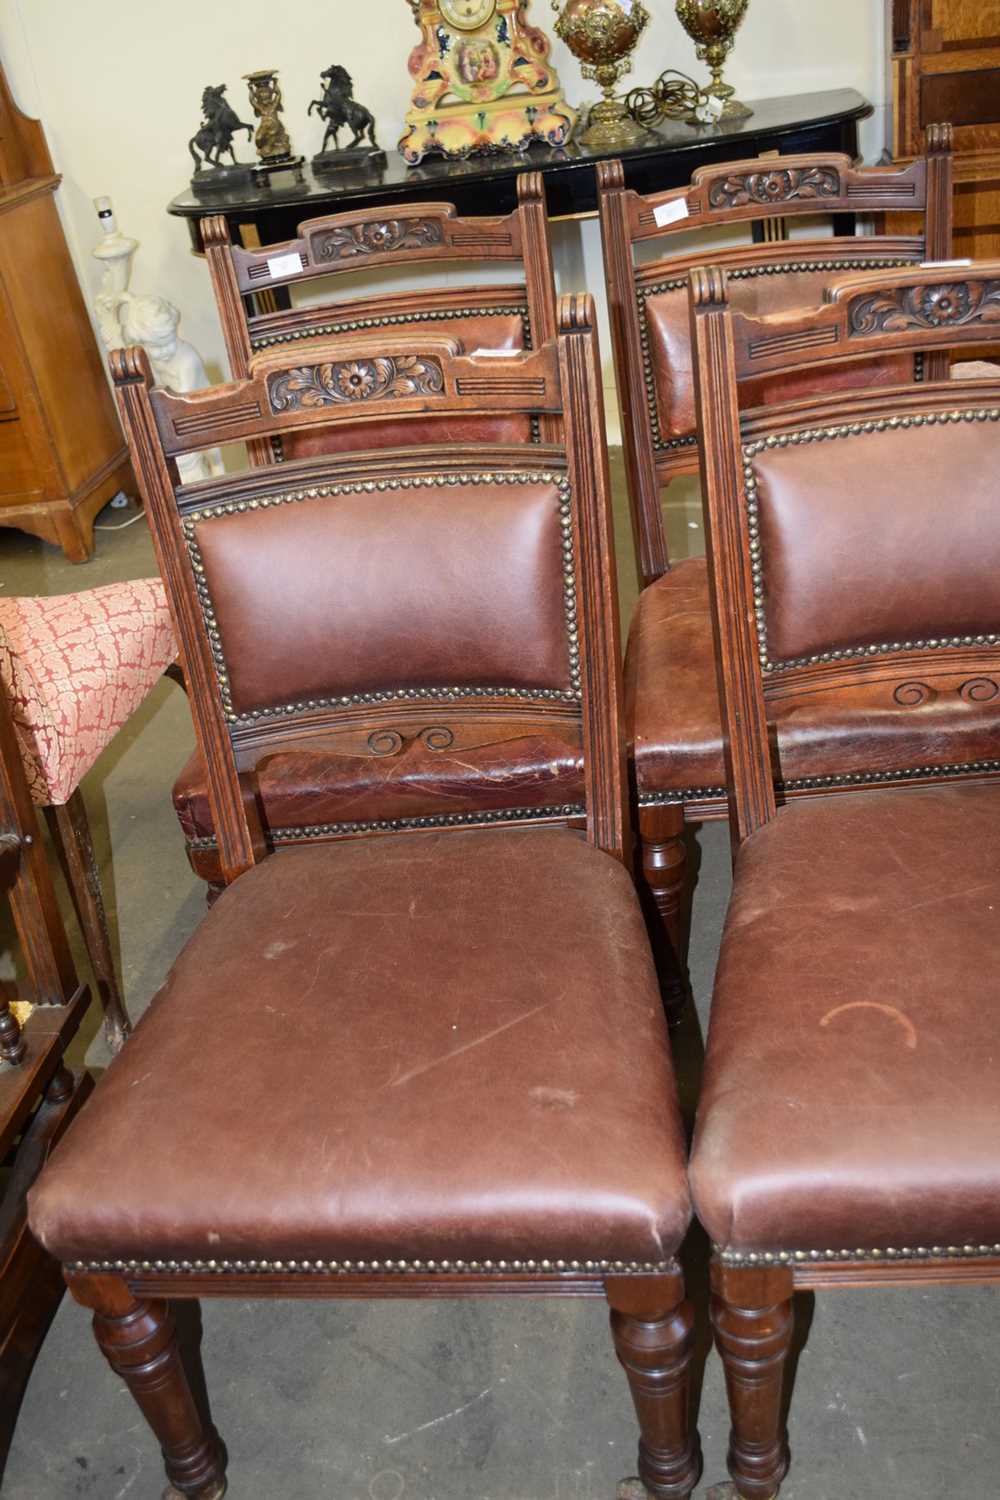 FIVE LATE VICTORIAN LEATHER UPHOLSTERED DINING CHAIRS - Image 2 of 2